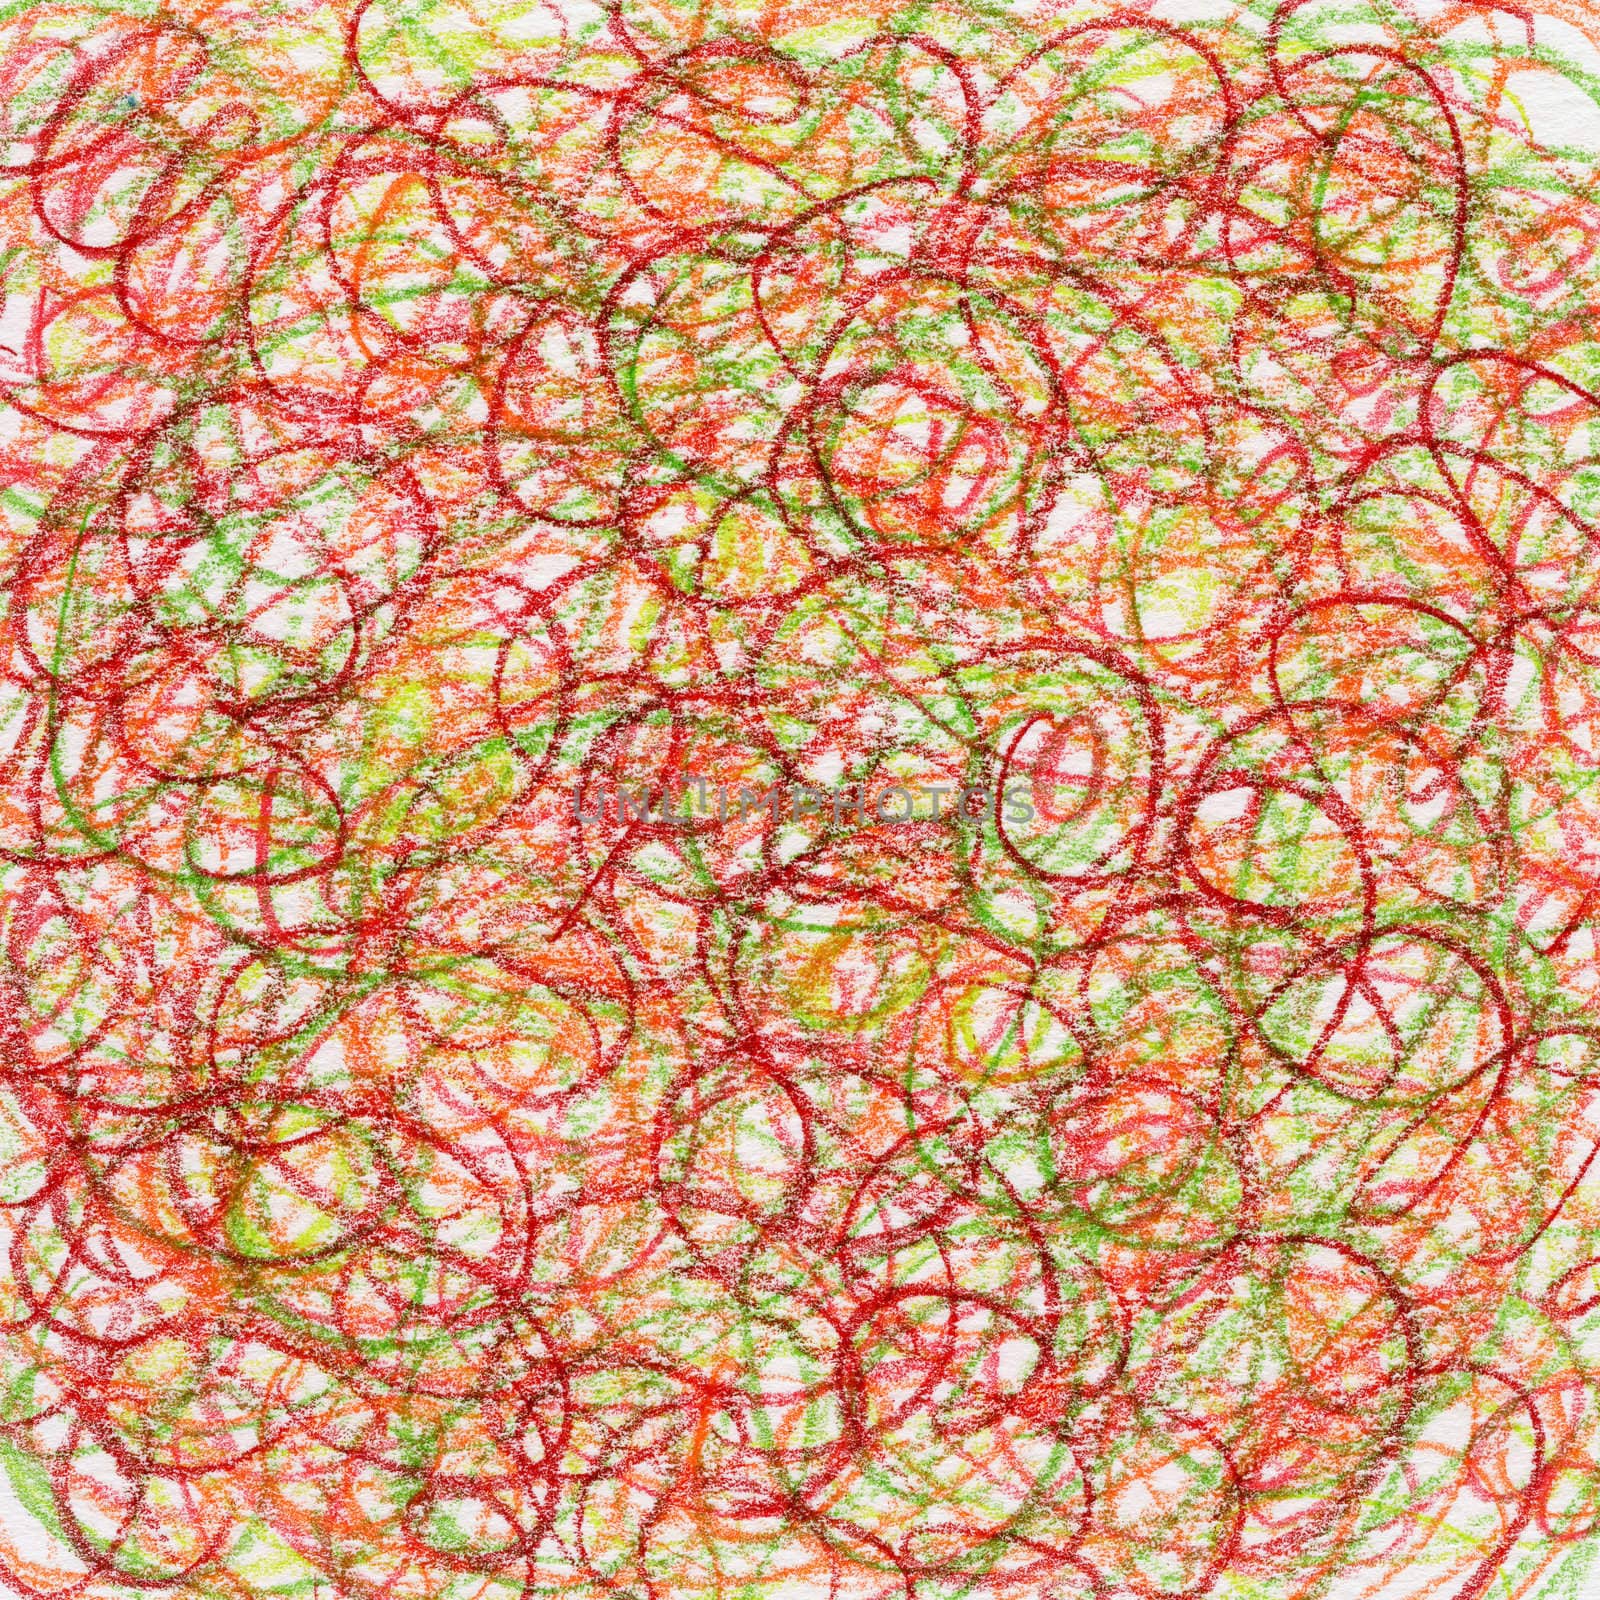 red crayon scribble abstract background by PixelsAway